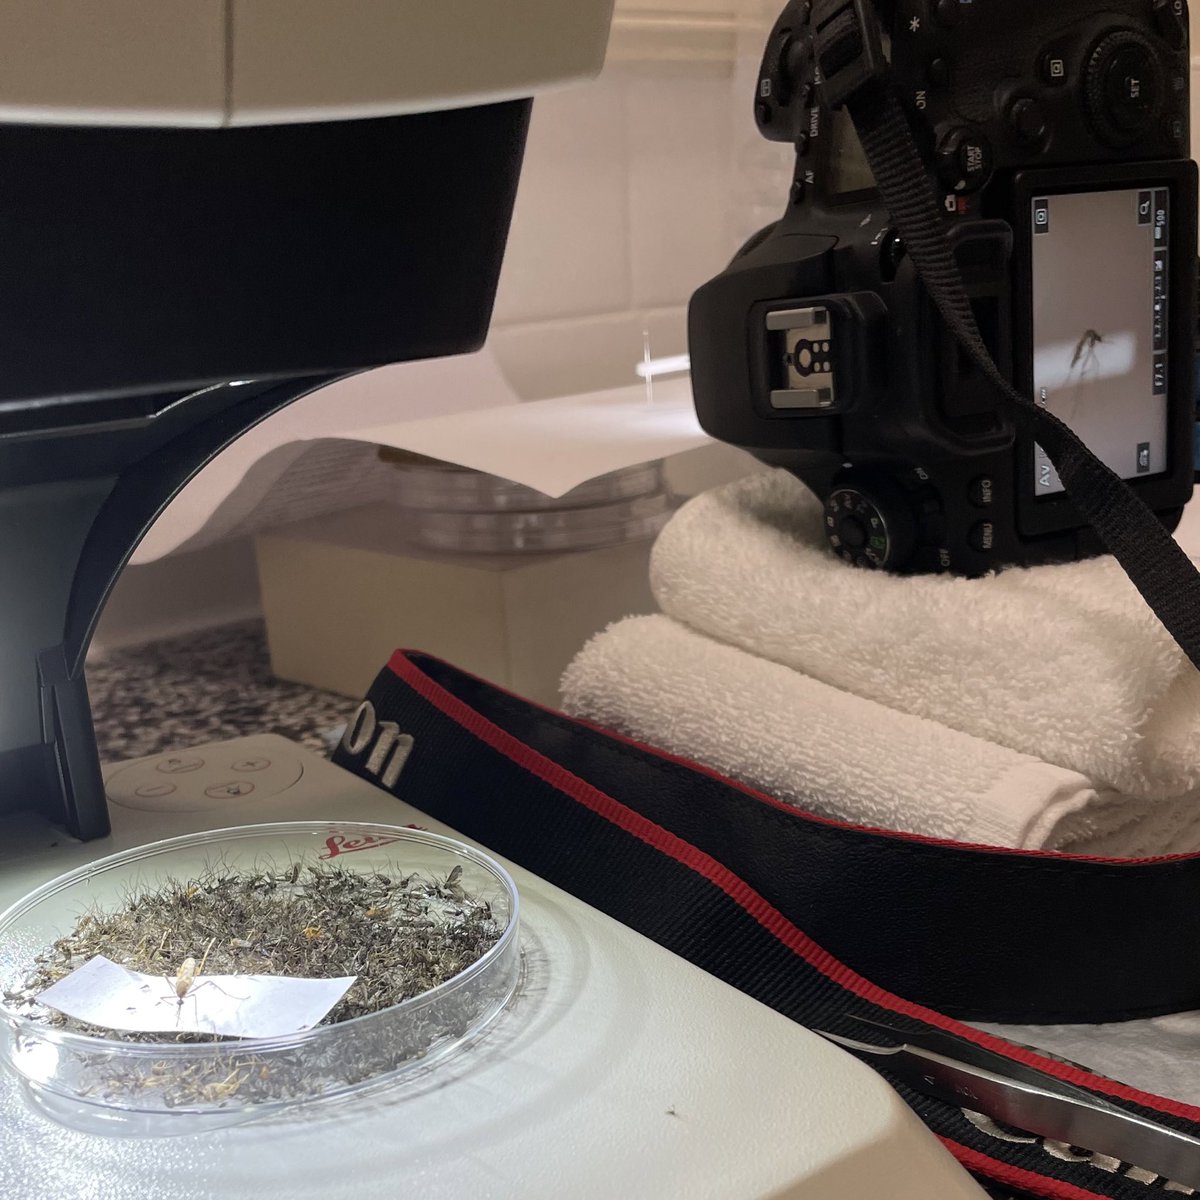 Fieldwork life. Sometimes the hotel bathroom has to become an entomology lab and photography studio! 🔬📸🦟